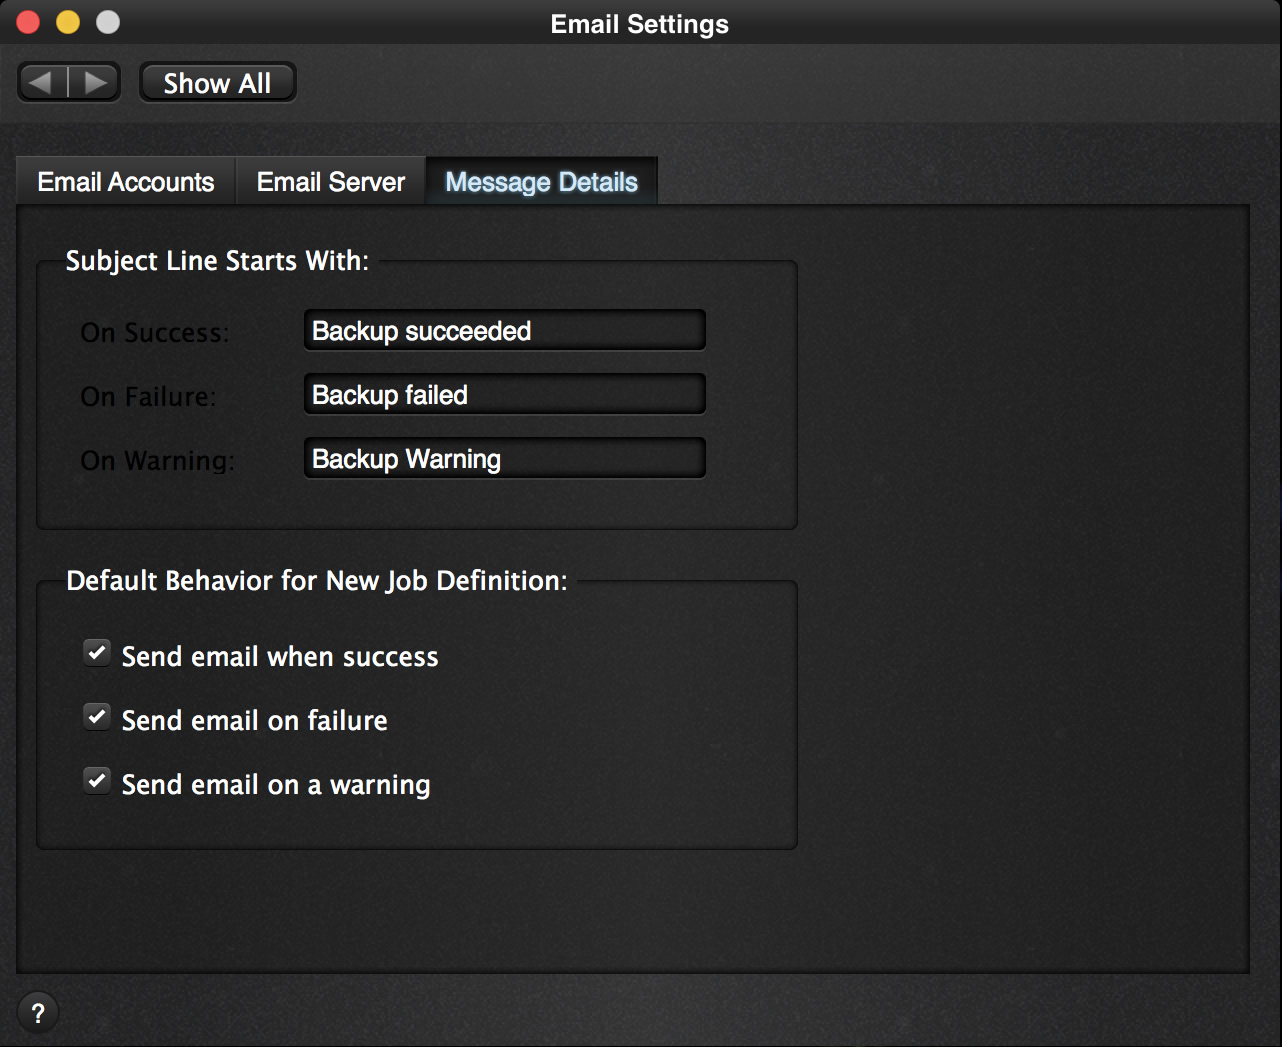 Email Settings - Message Details